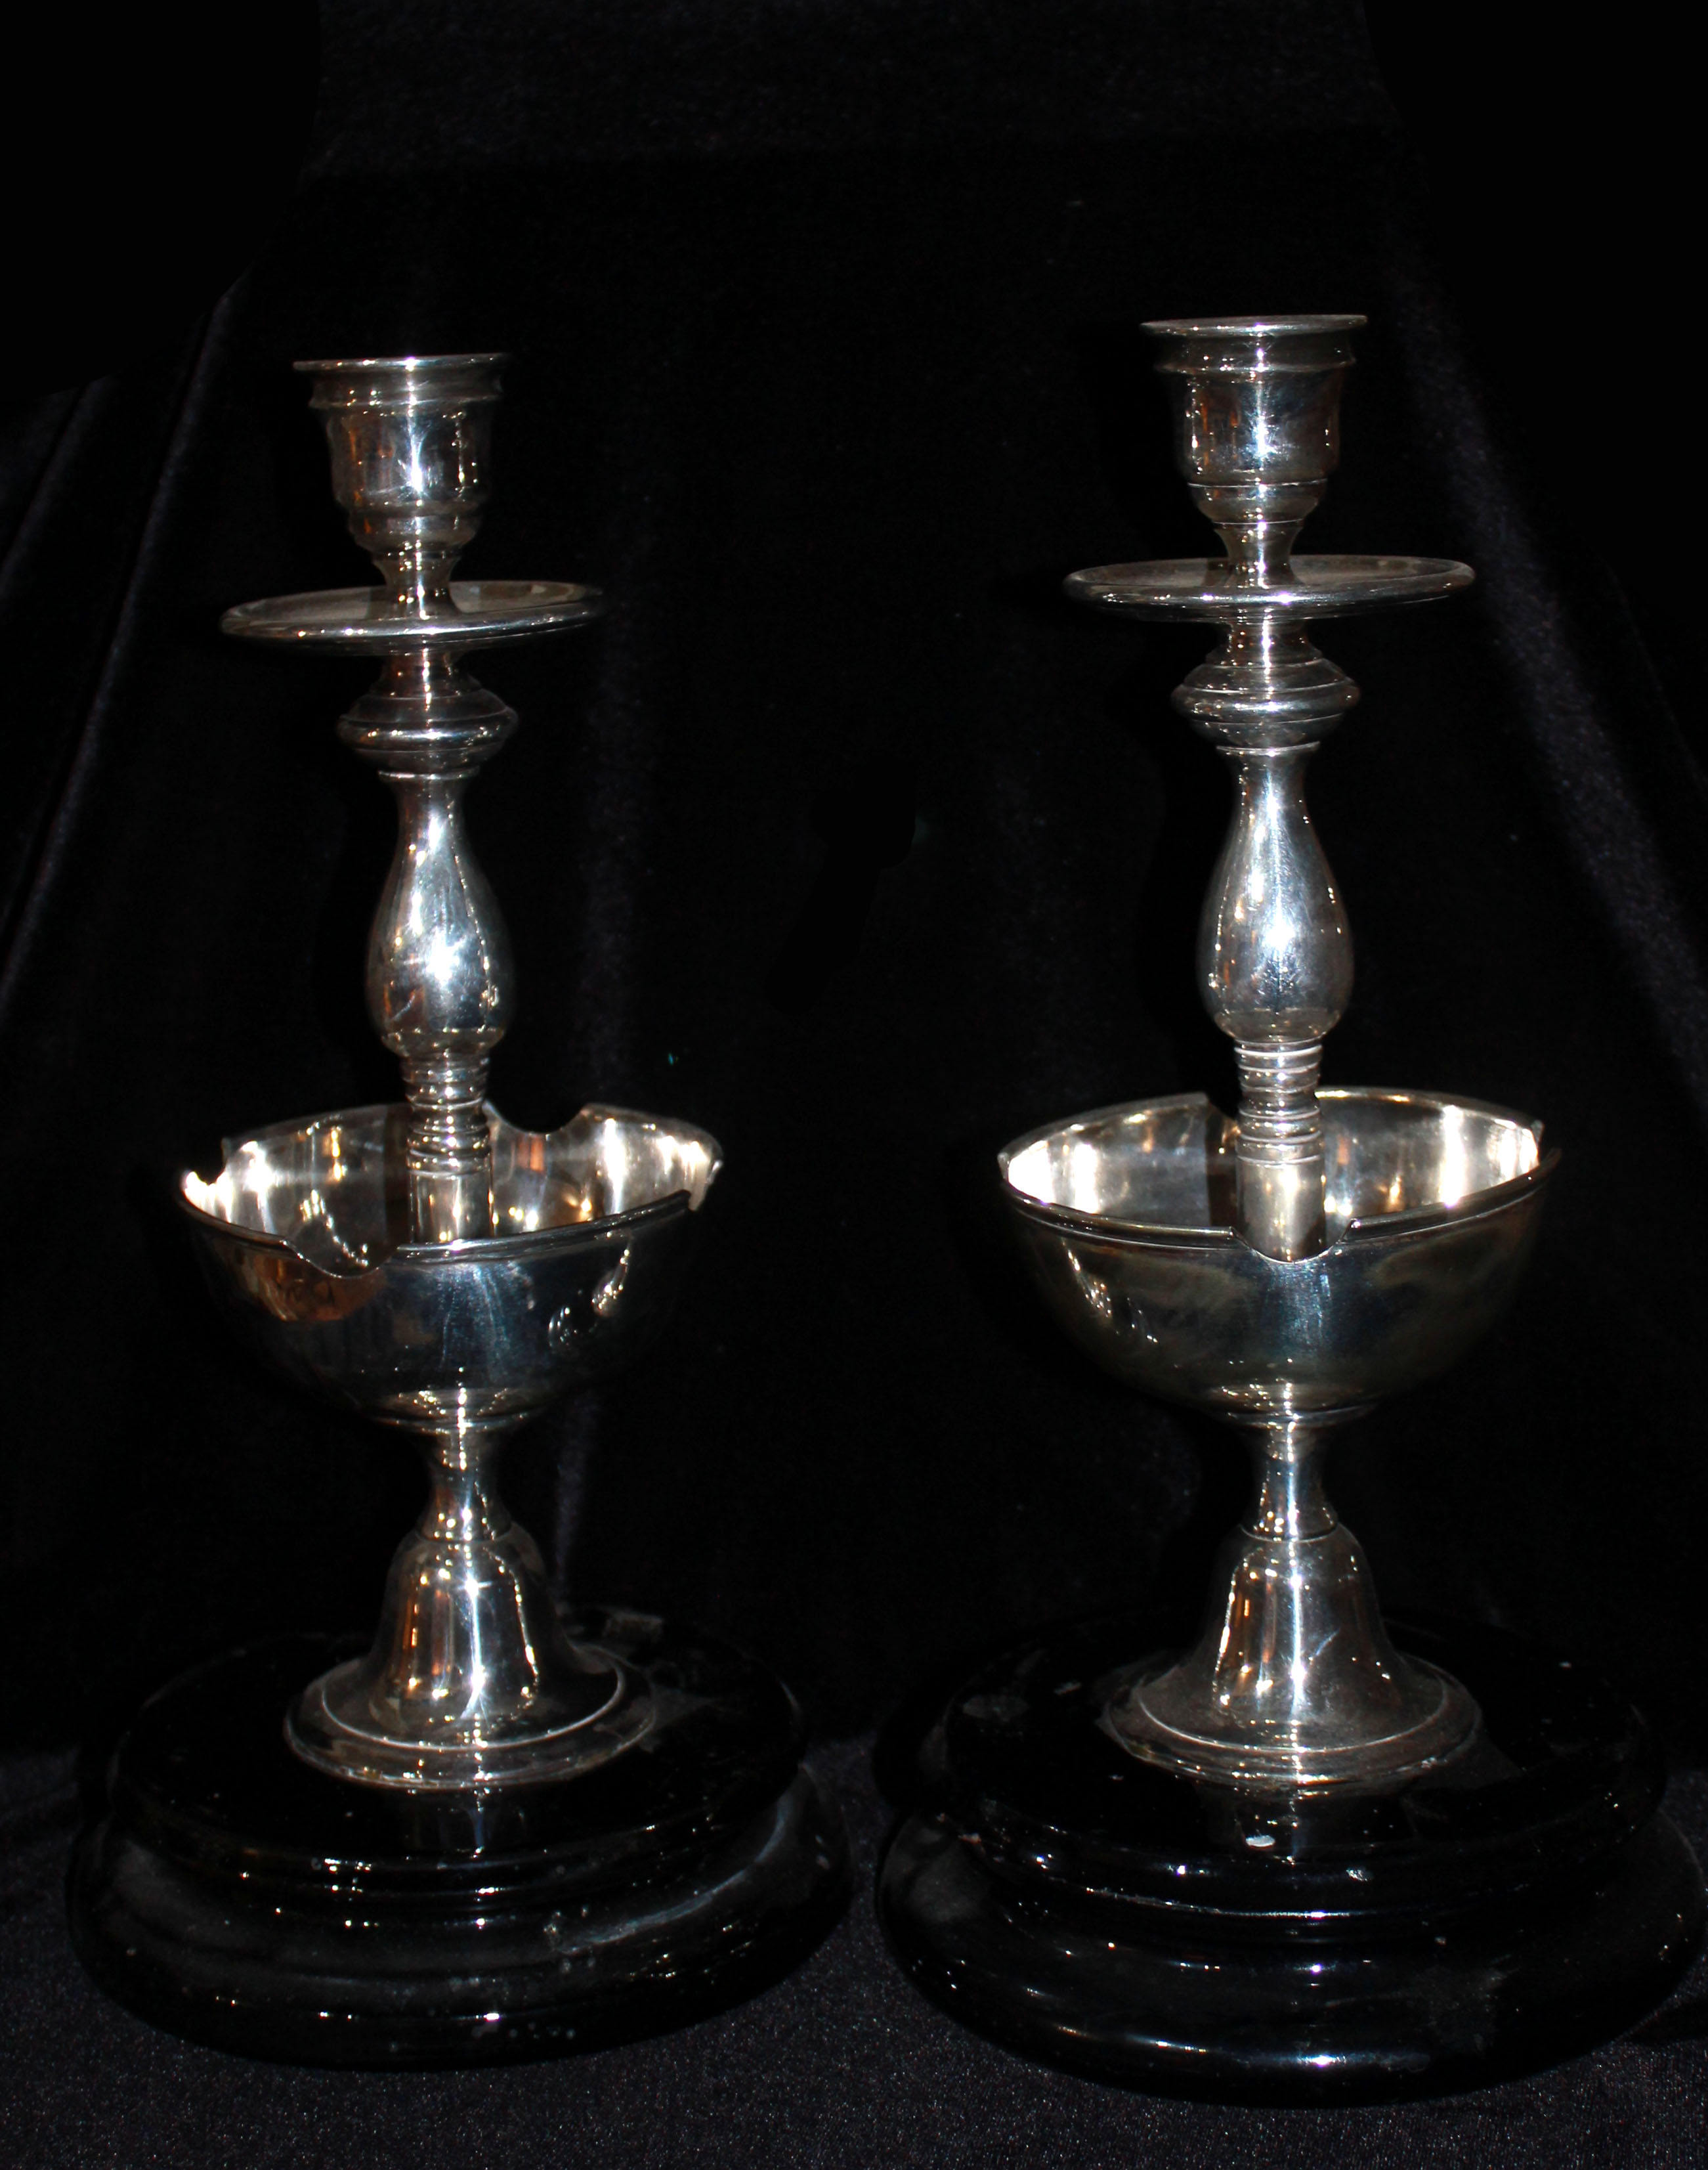 AN UNUSUAL PAIR OF 20TH CENTURY SILVER PLATED BALUSTER CANDLESTICKS WITH CIGAR HOLDER SECTIONS